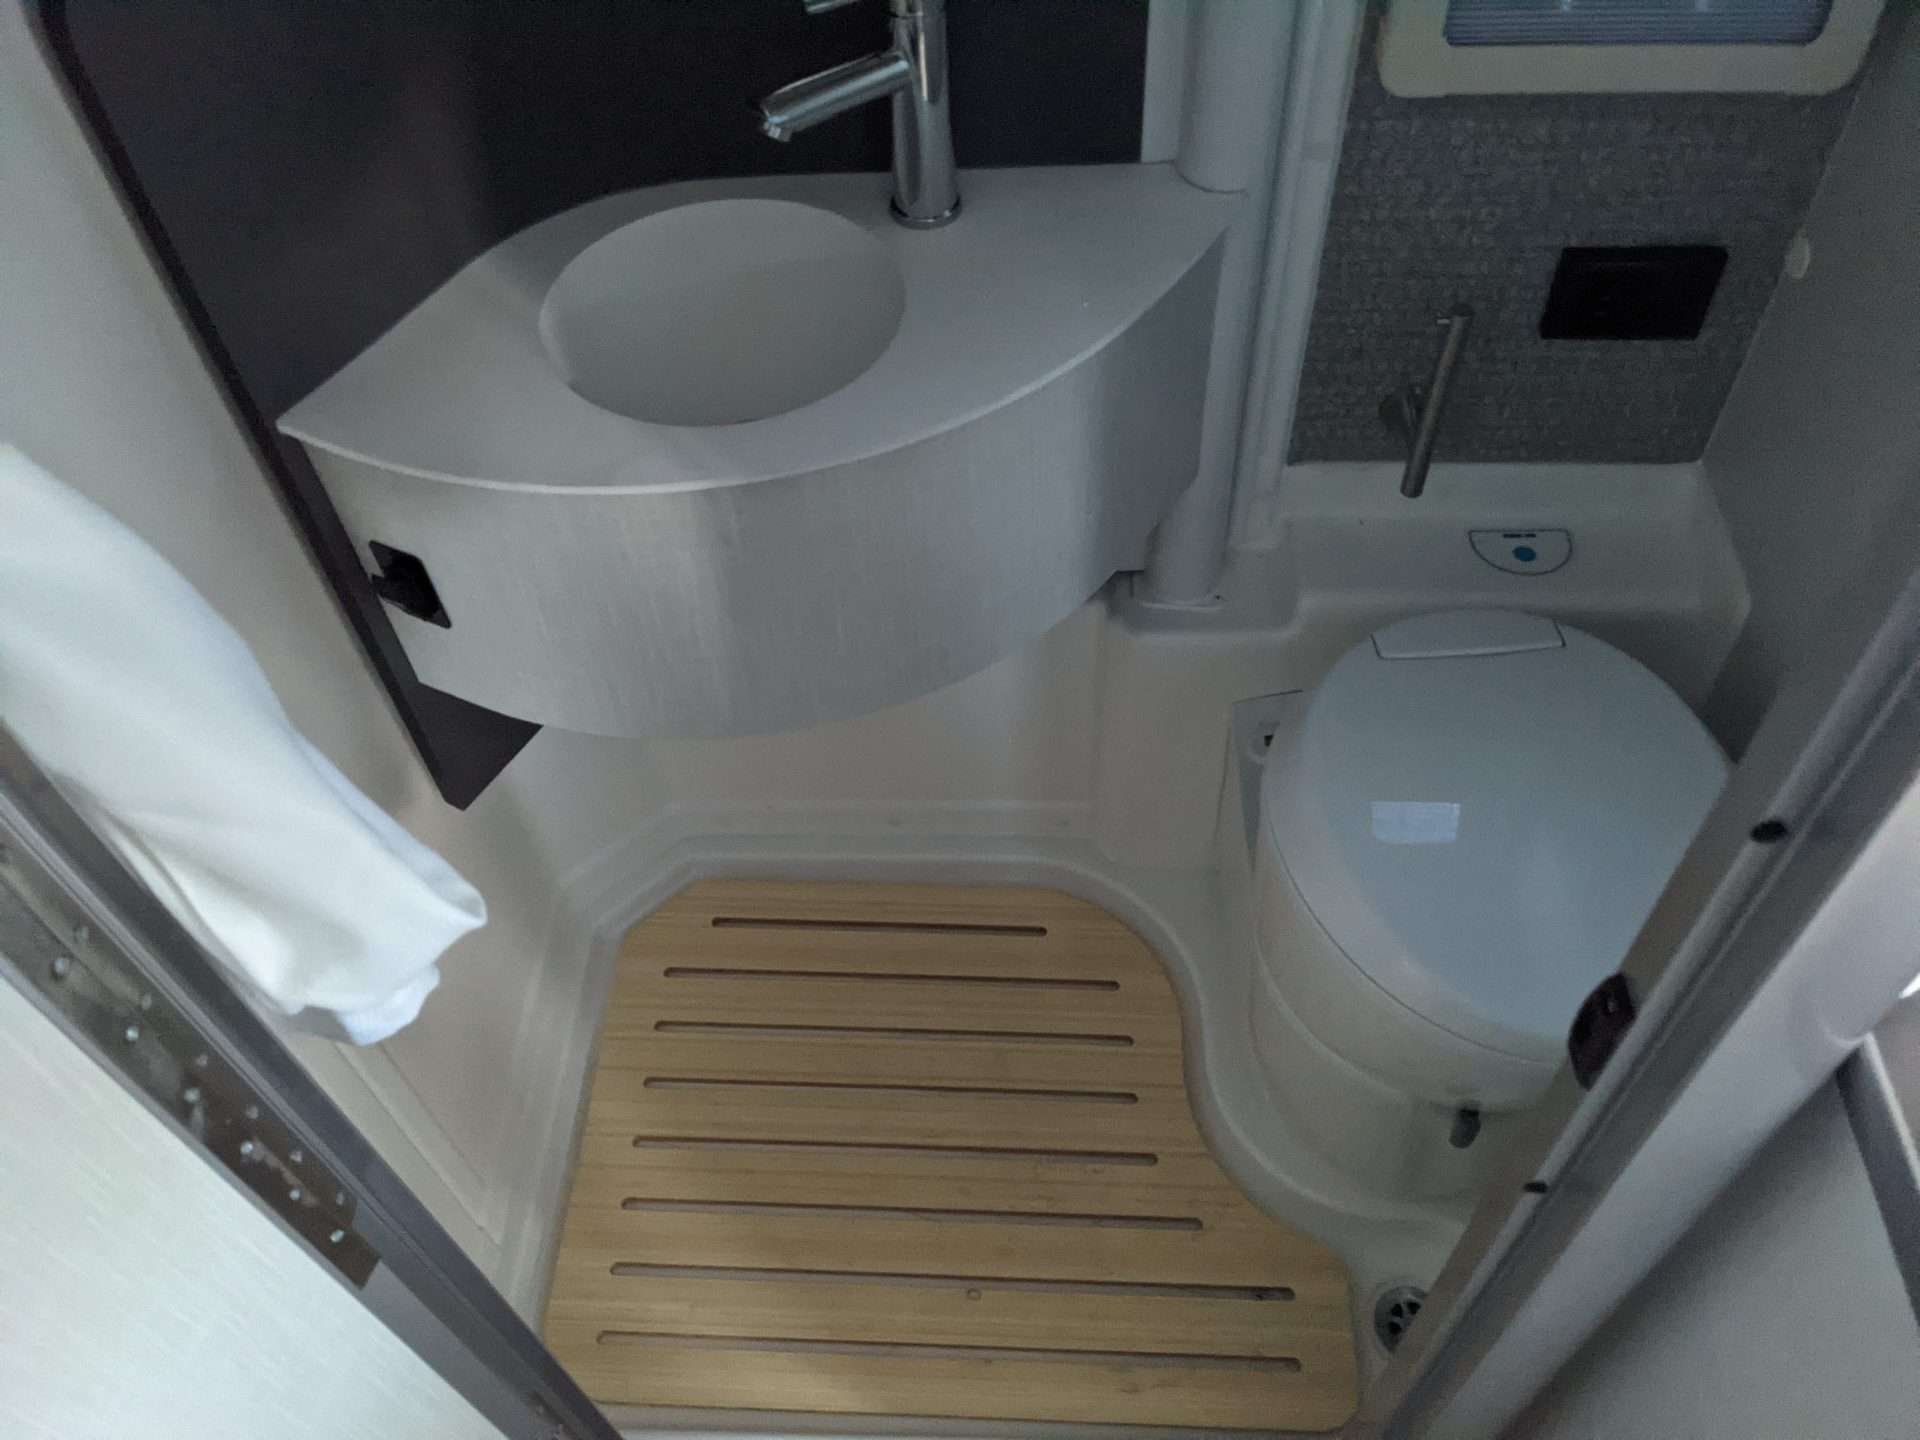 Interior of campervan bathroom with shower and toilet